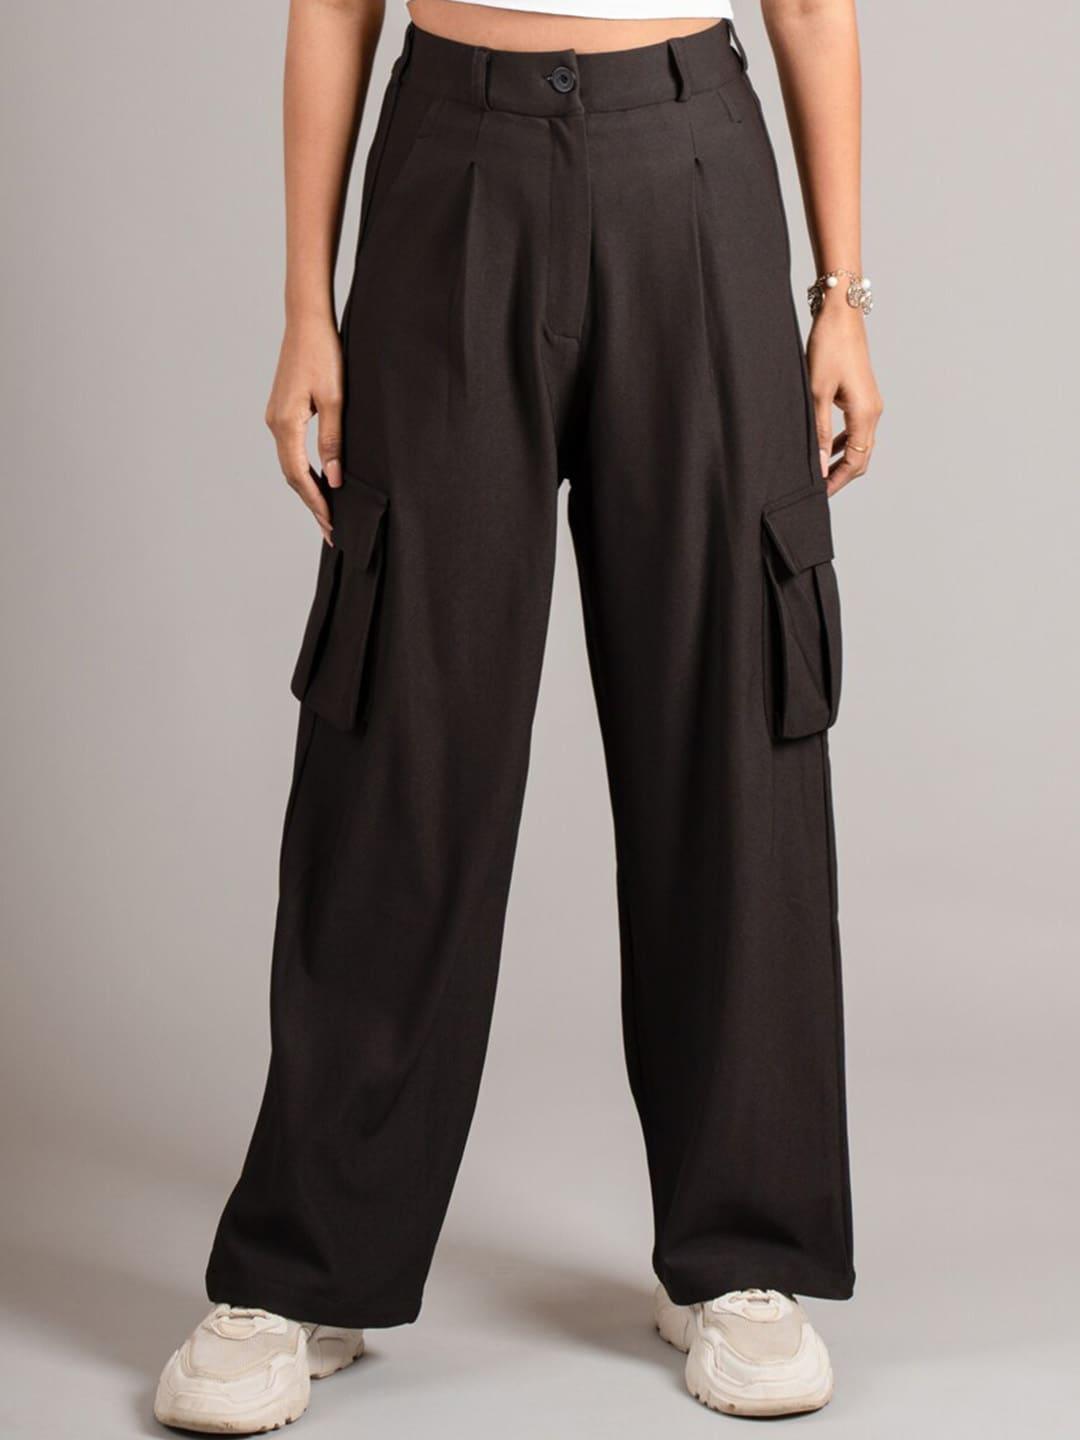 dressberry-women-black-high-rise-pleated-cargos-trousers